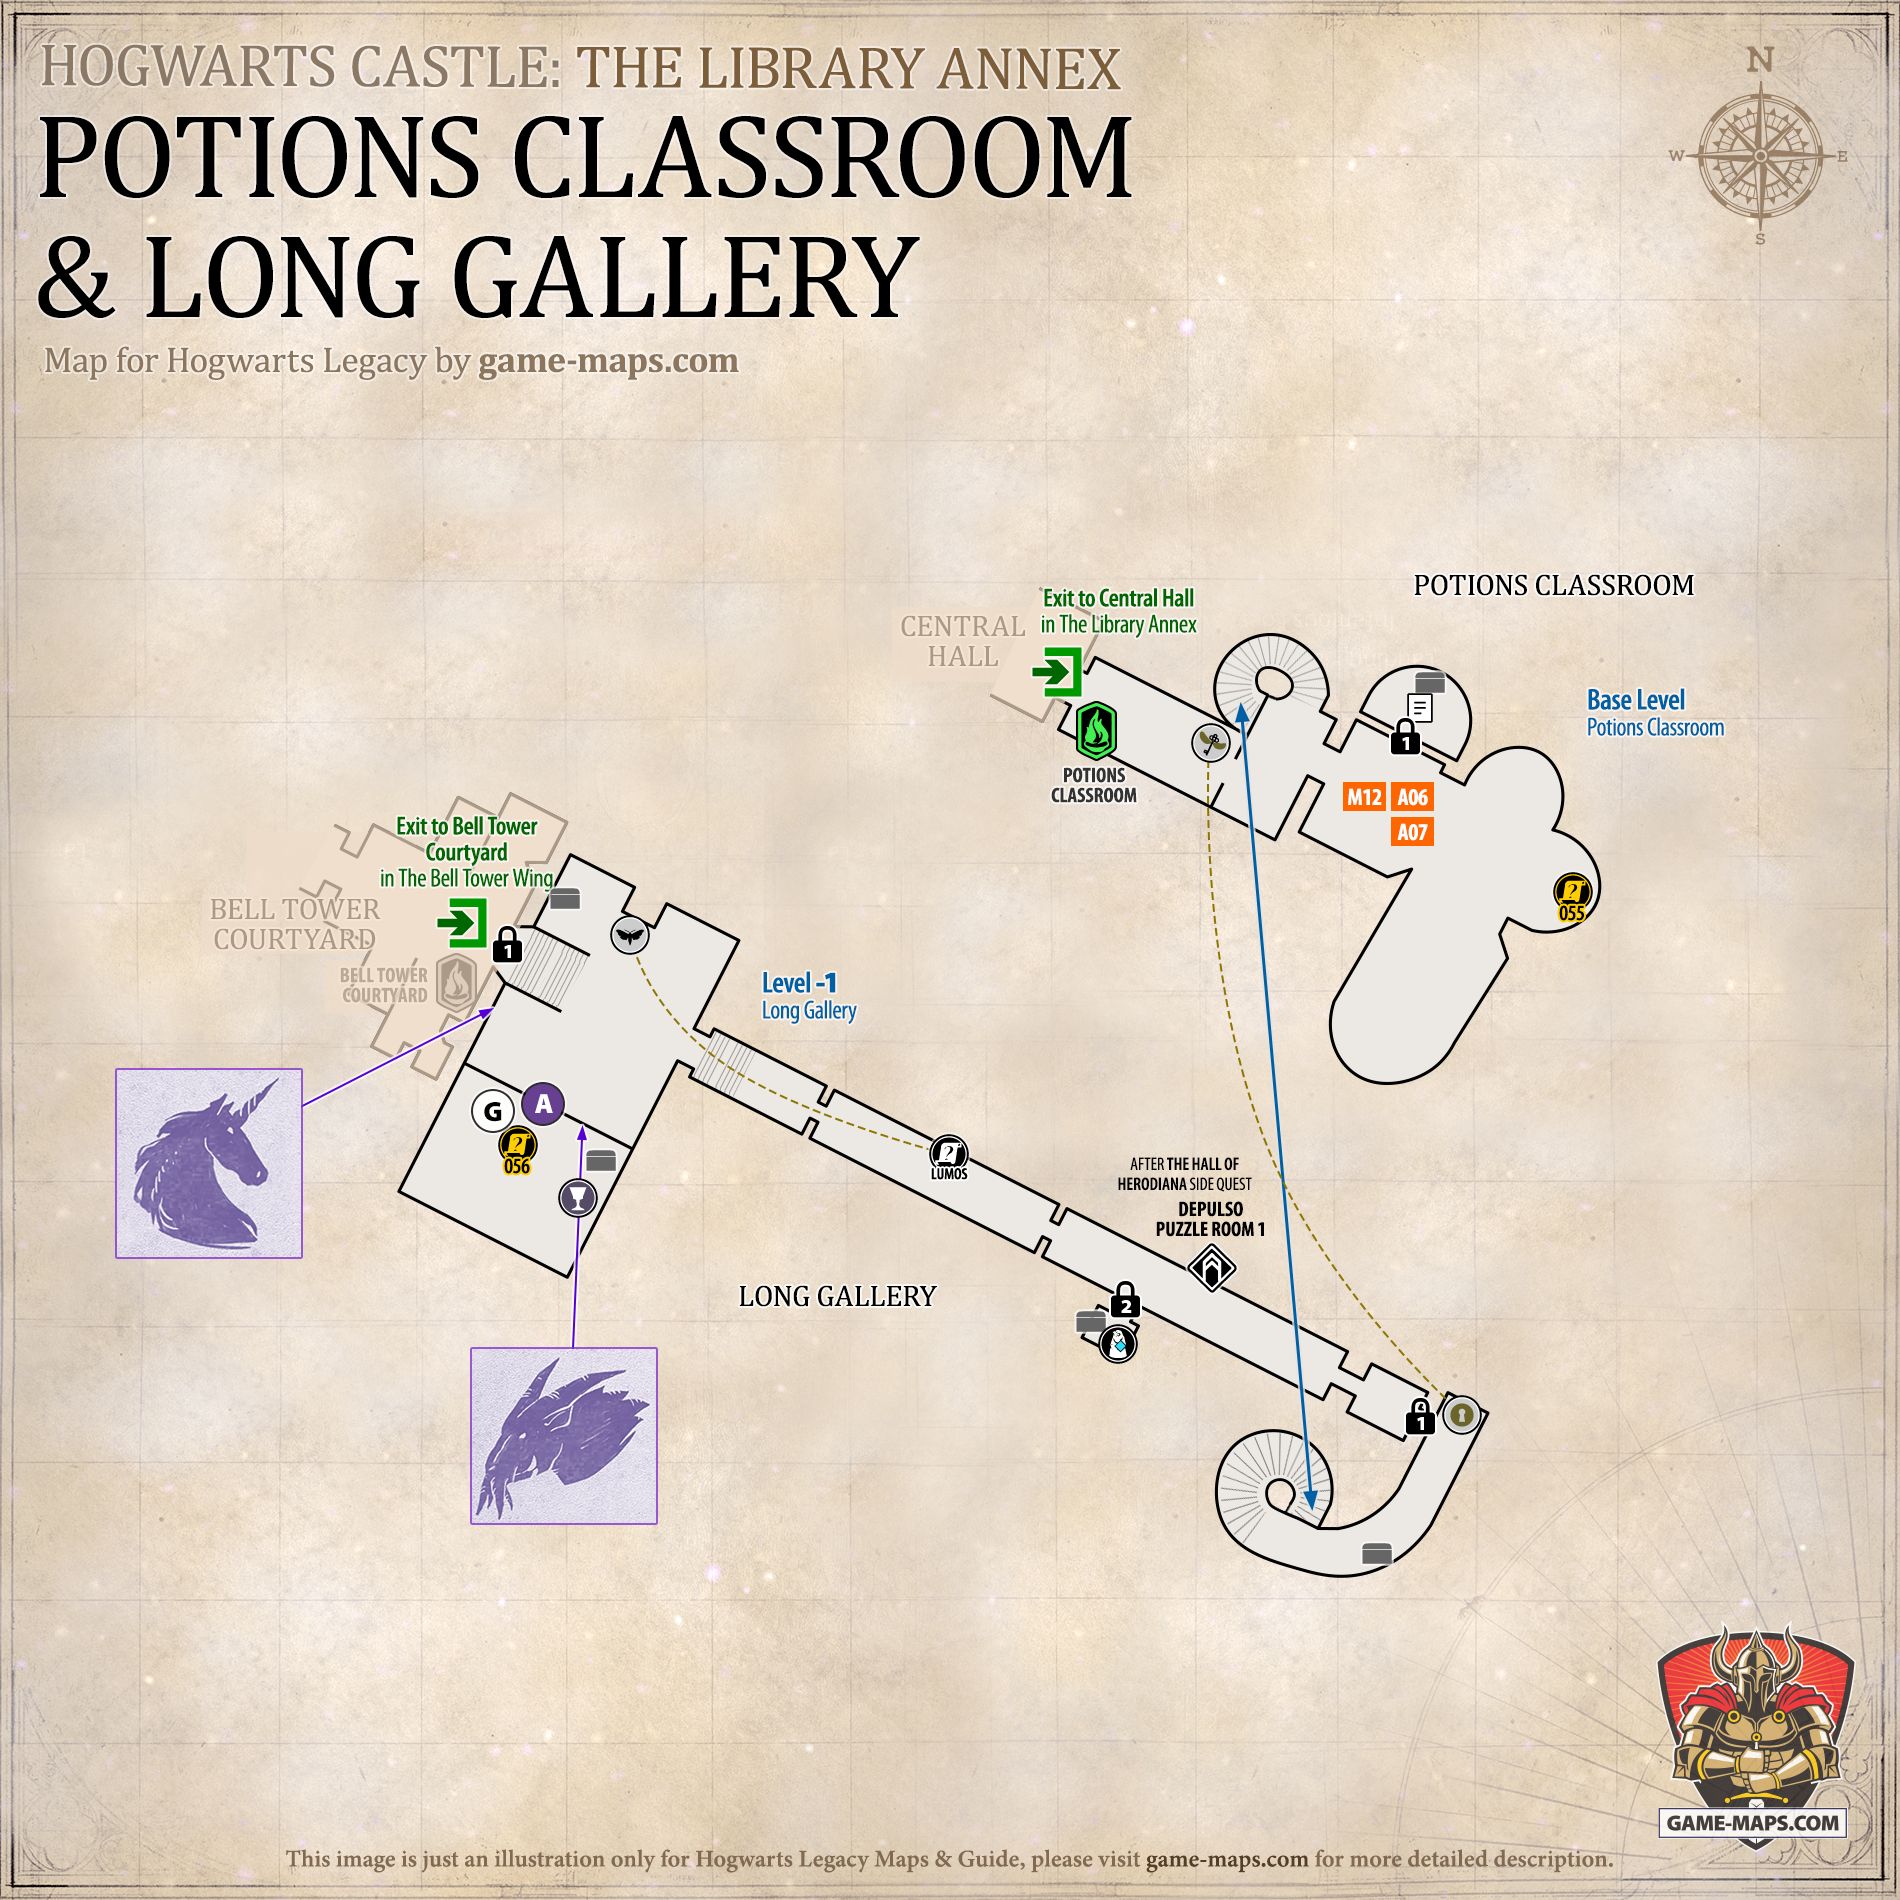 Potions Classroom & Long Gallery Map for Hogwarts Legacy